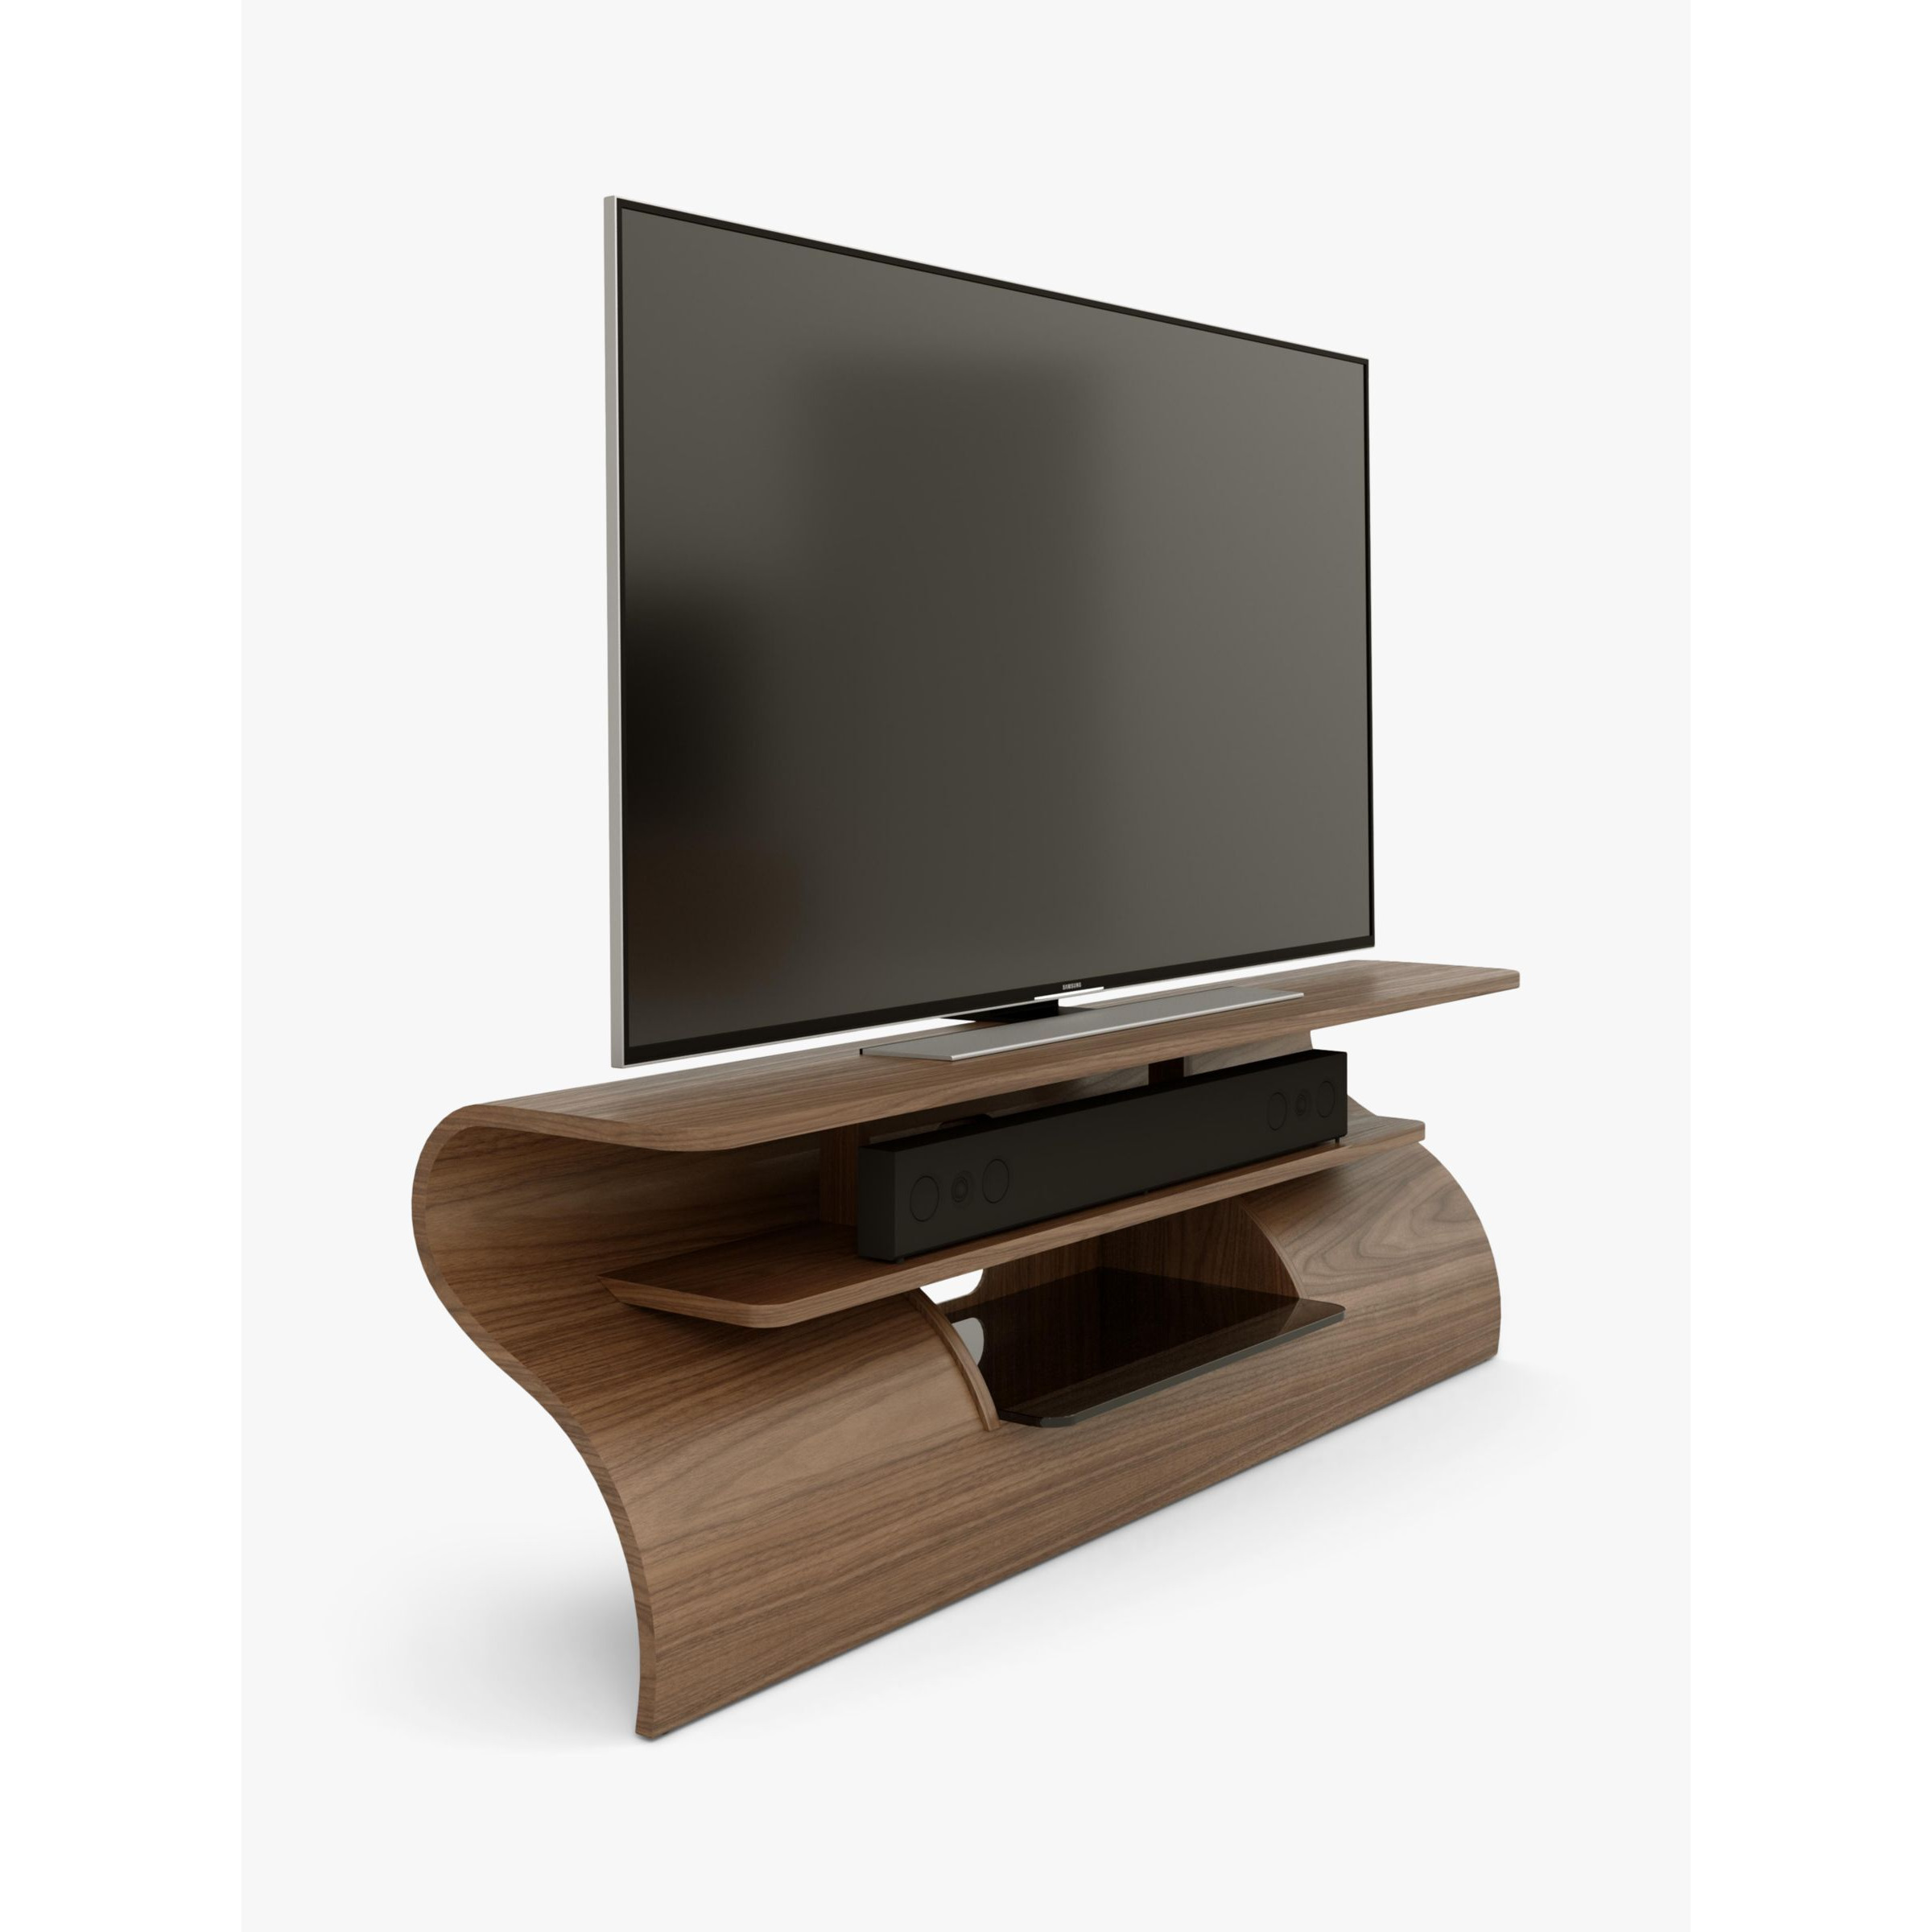 "Tom Schneider Surge 1500 TV Stand for TVs up to 65""" - image 1